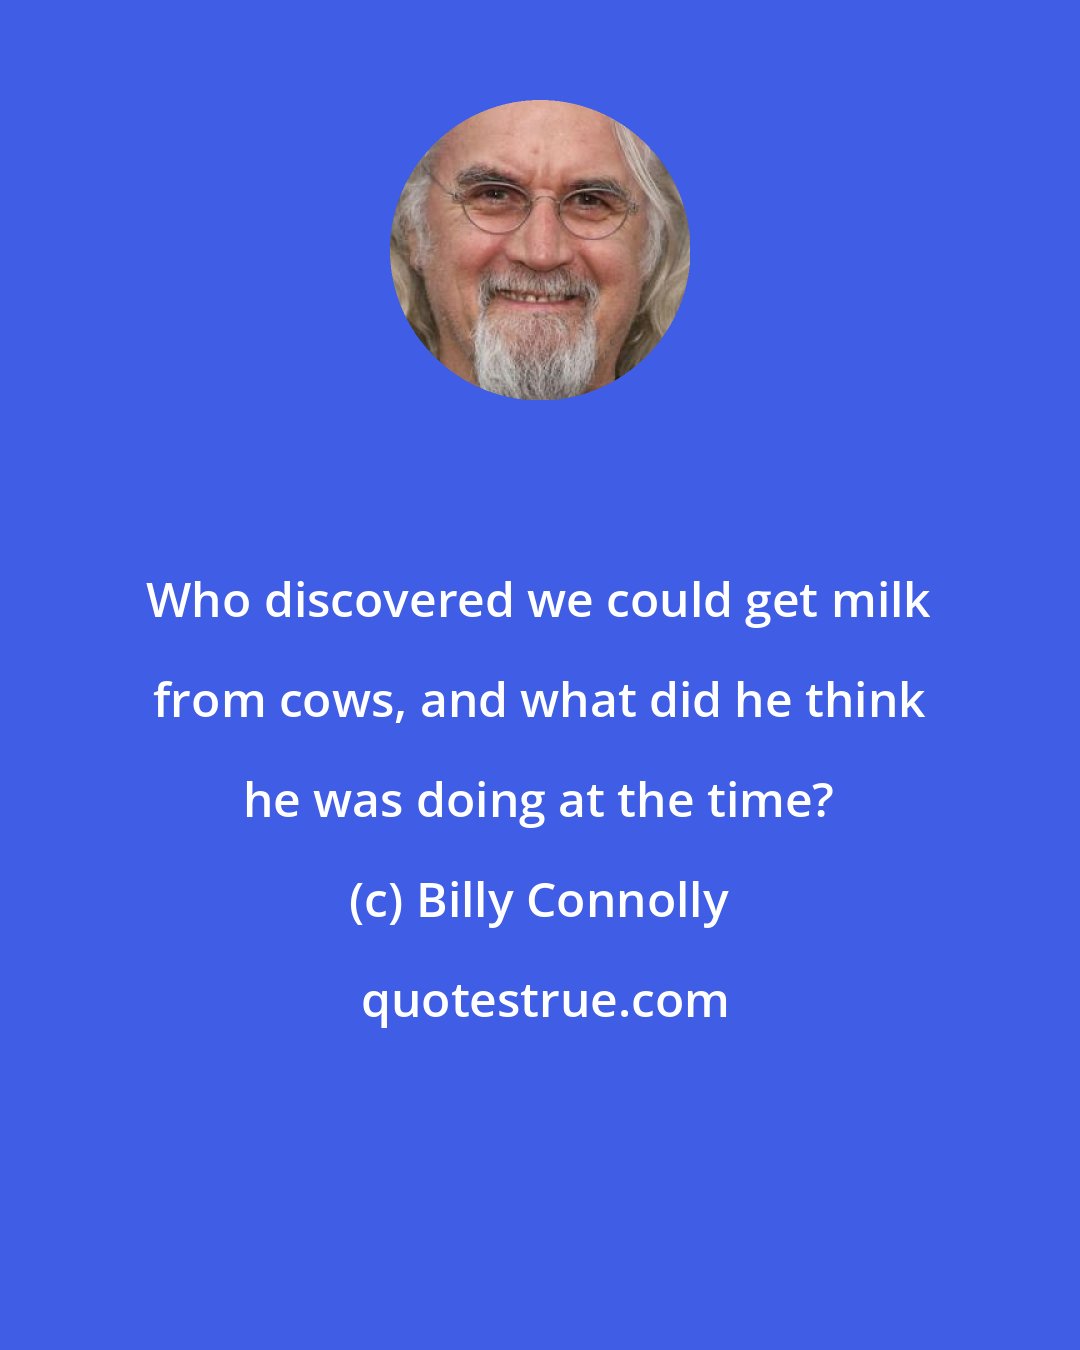 Billy Connolly: Who discovered we could get milk from cows, and what did he think he was doing at the time?